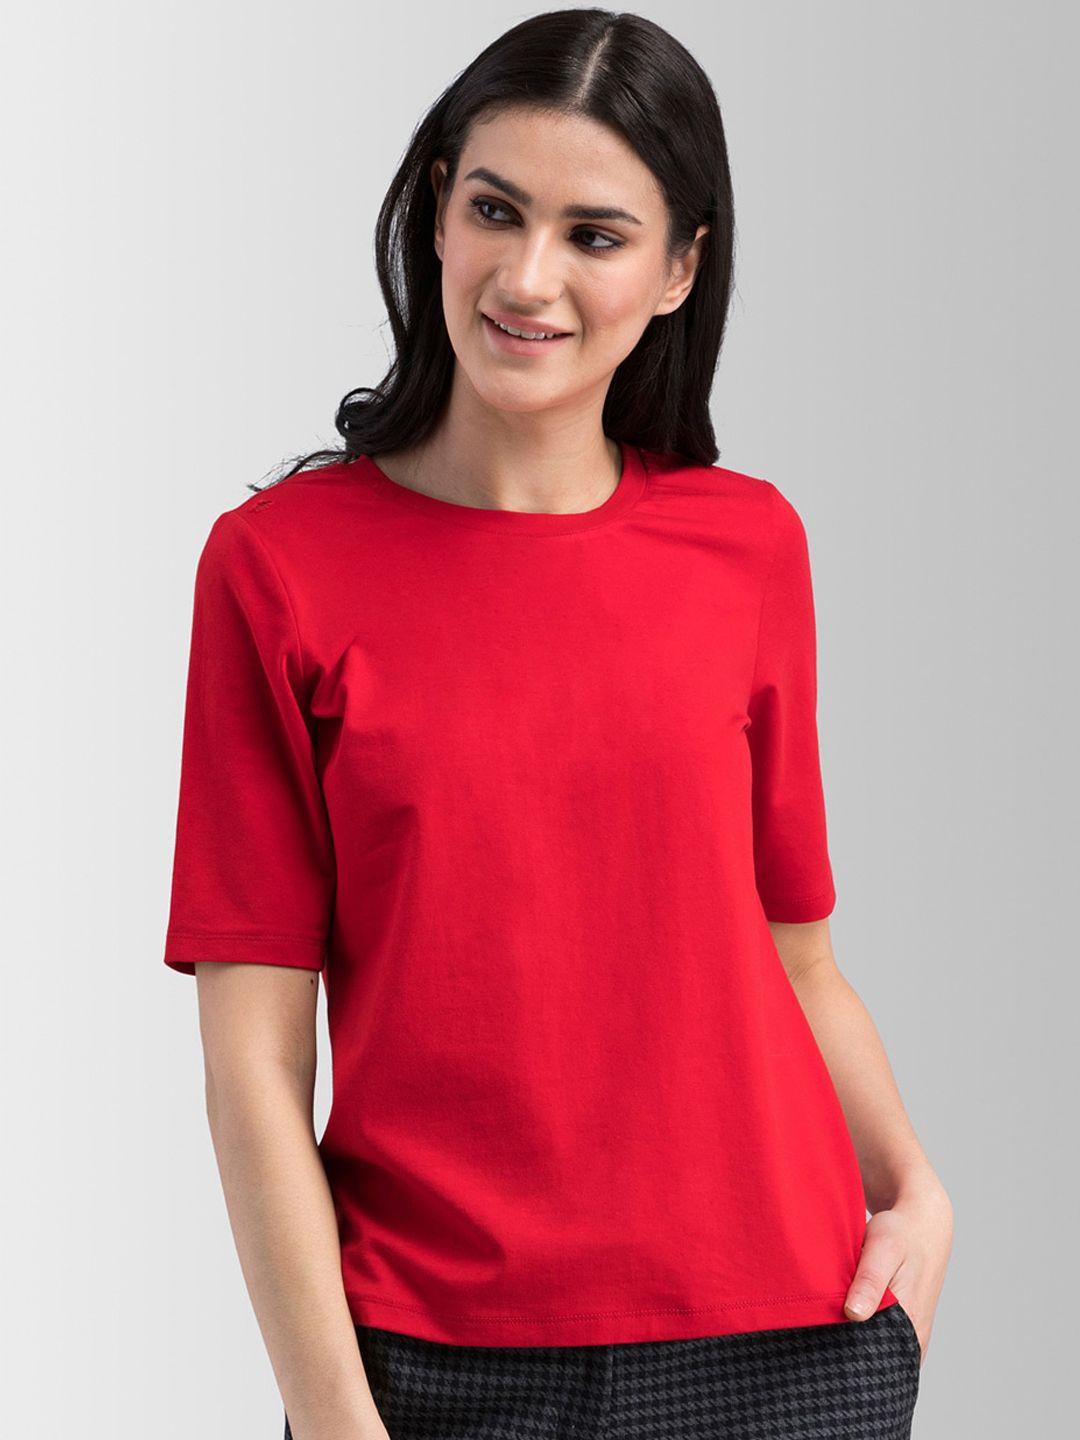 fablestreet-women-red-solid-round-neck-t-shirt